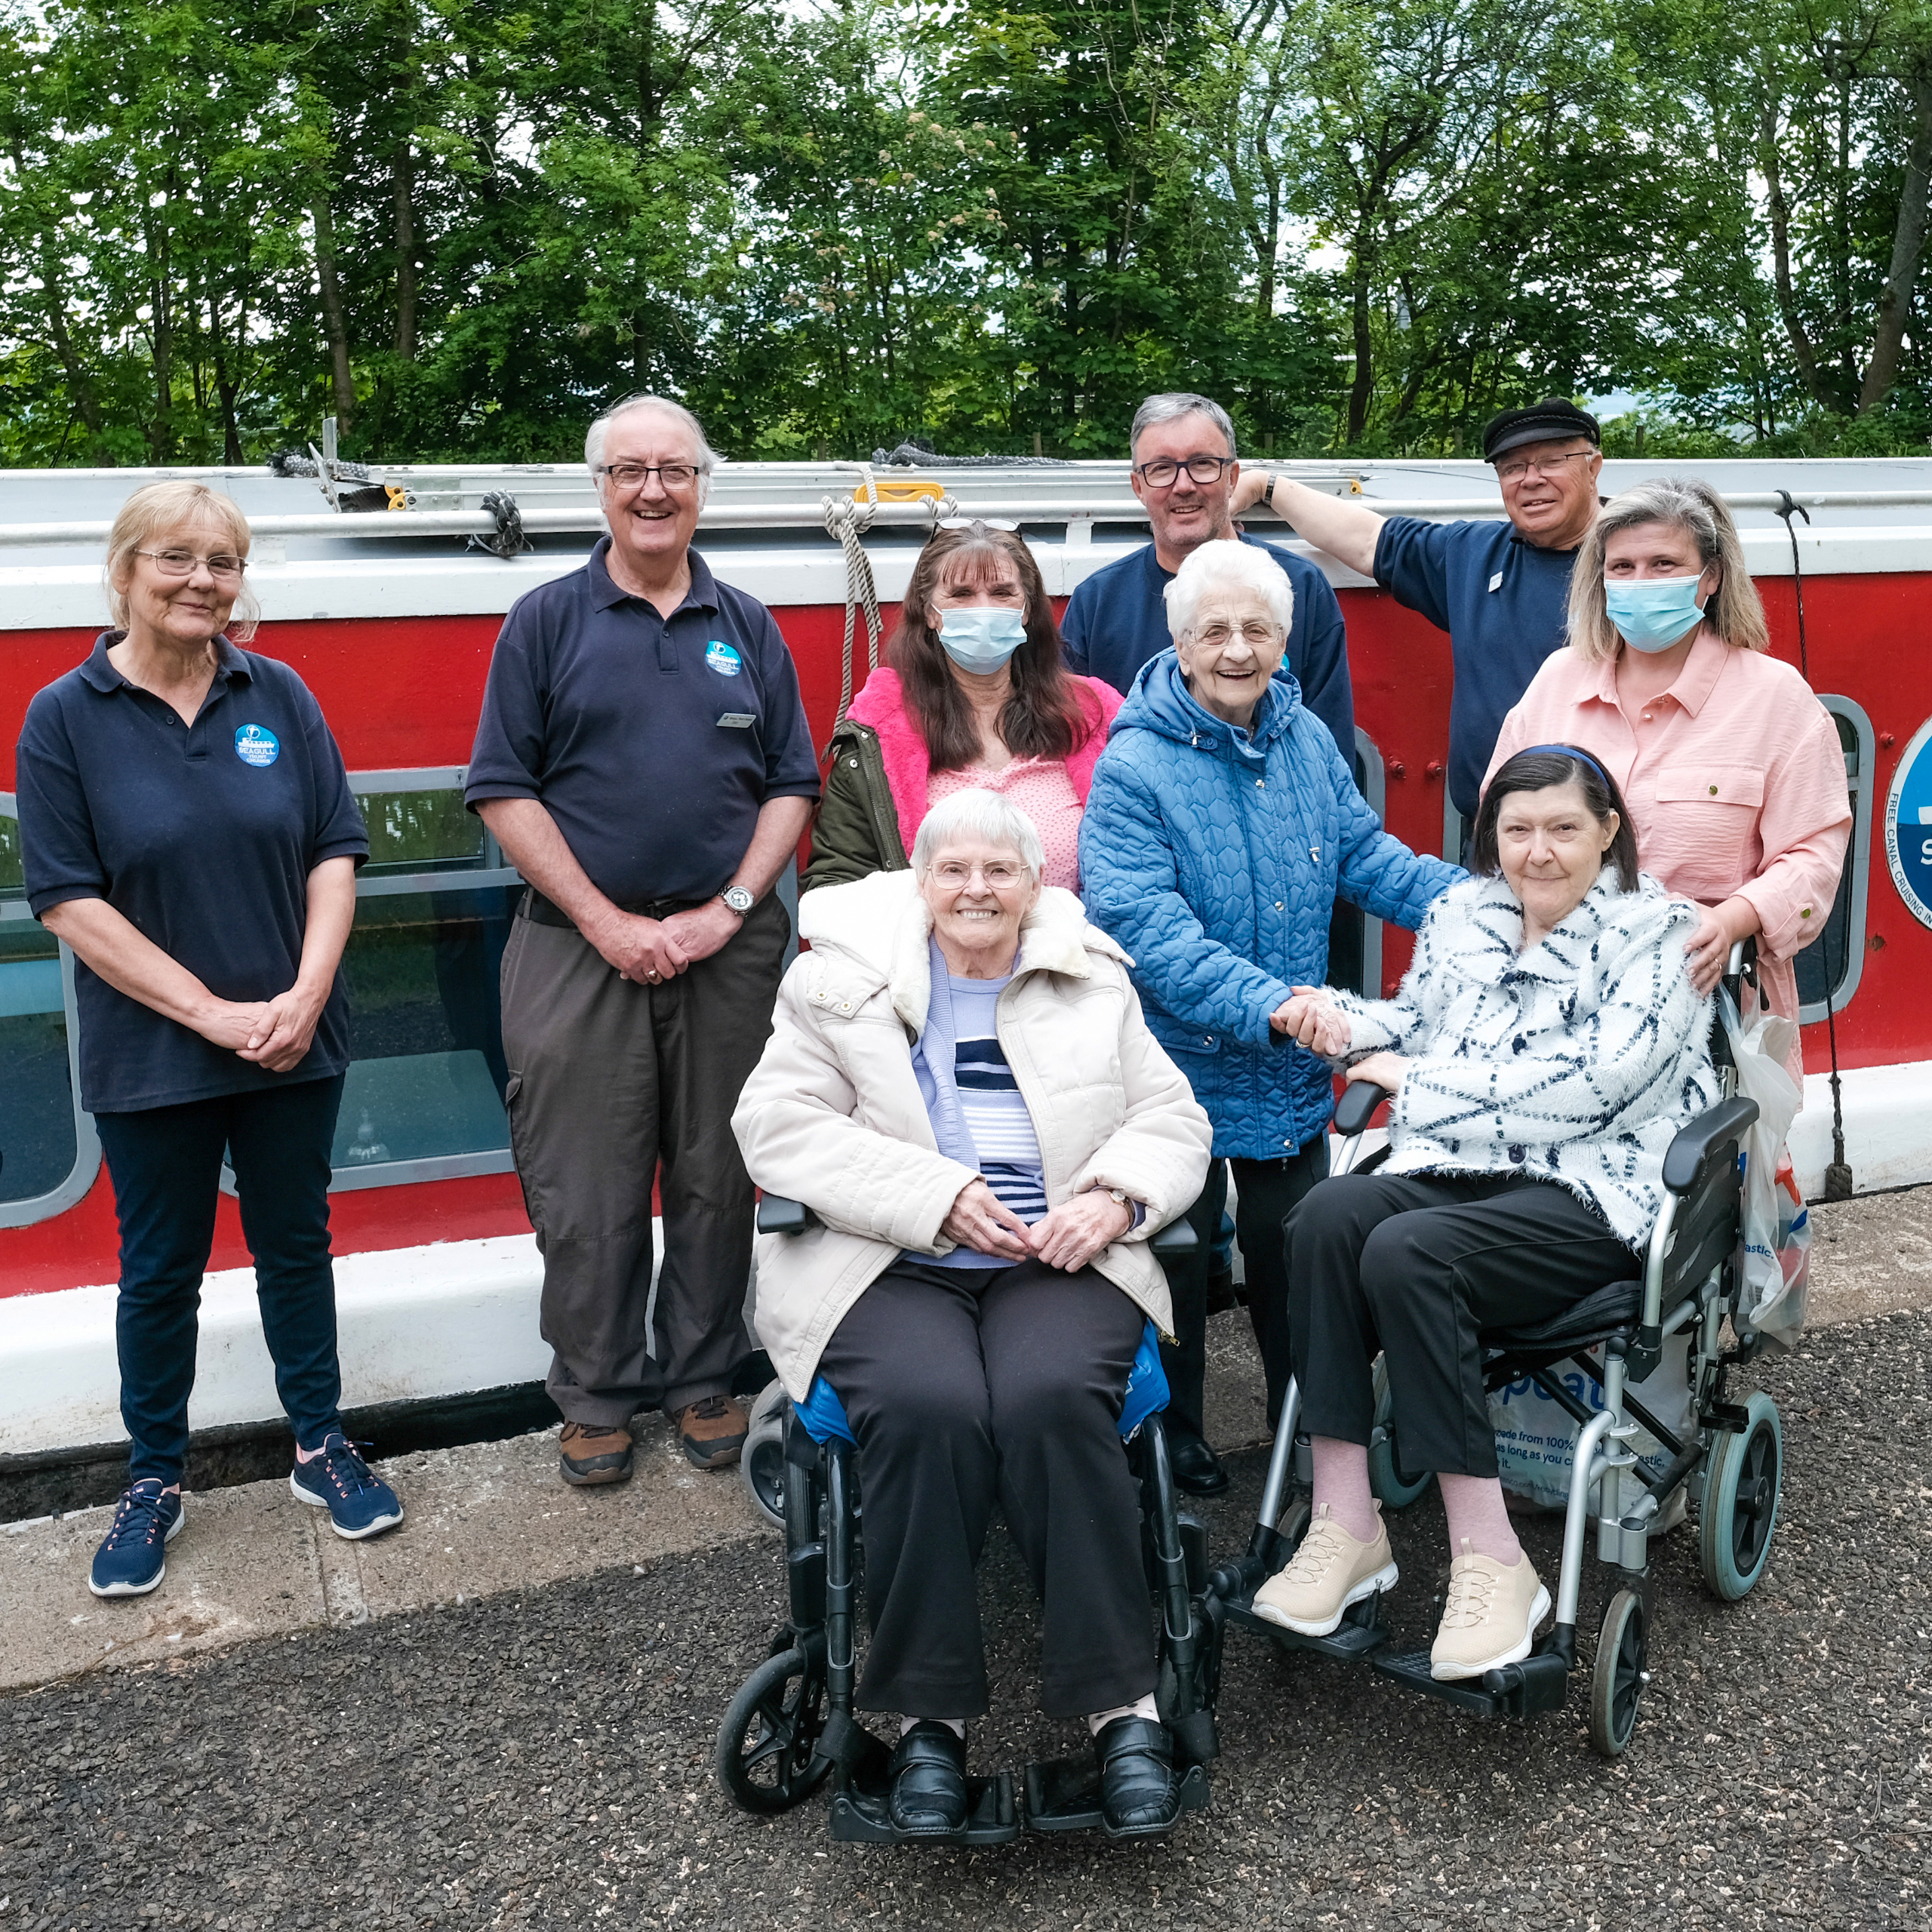 Wallside Grange residents Anne Mathy, Margaret Hastings, Ruby Johnstone join care staff Heather Scougall and Gillian Moore for a cruise on the local canal.